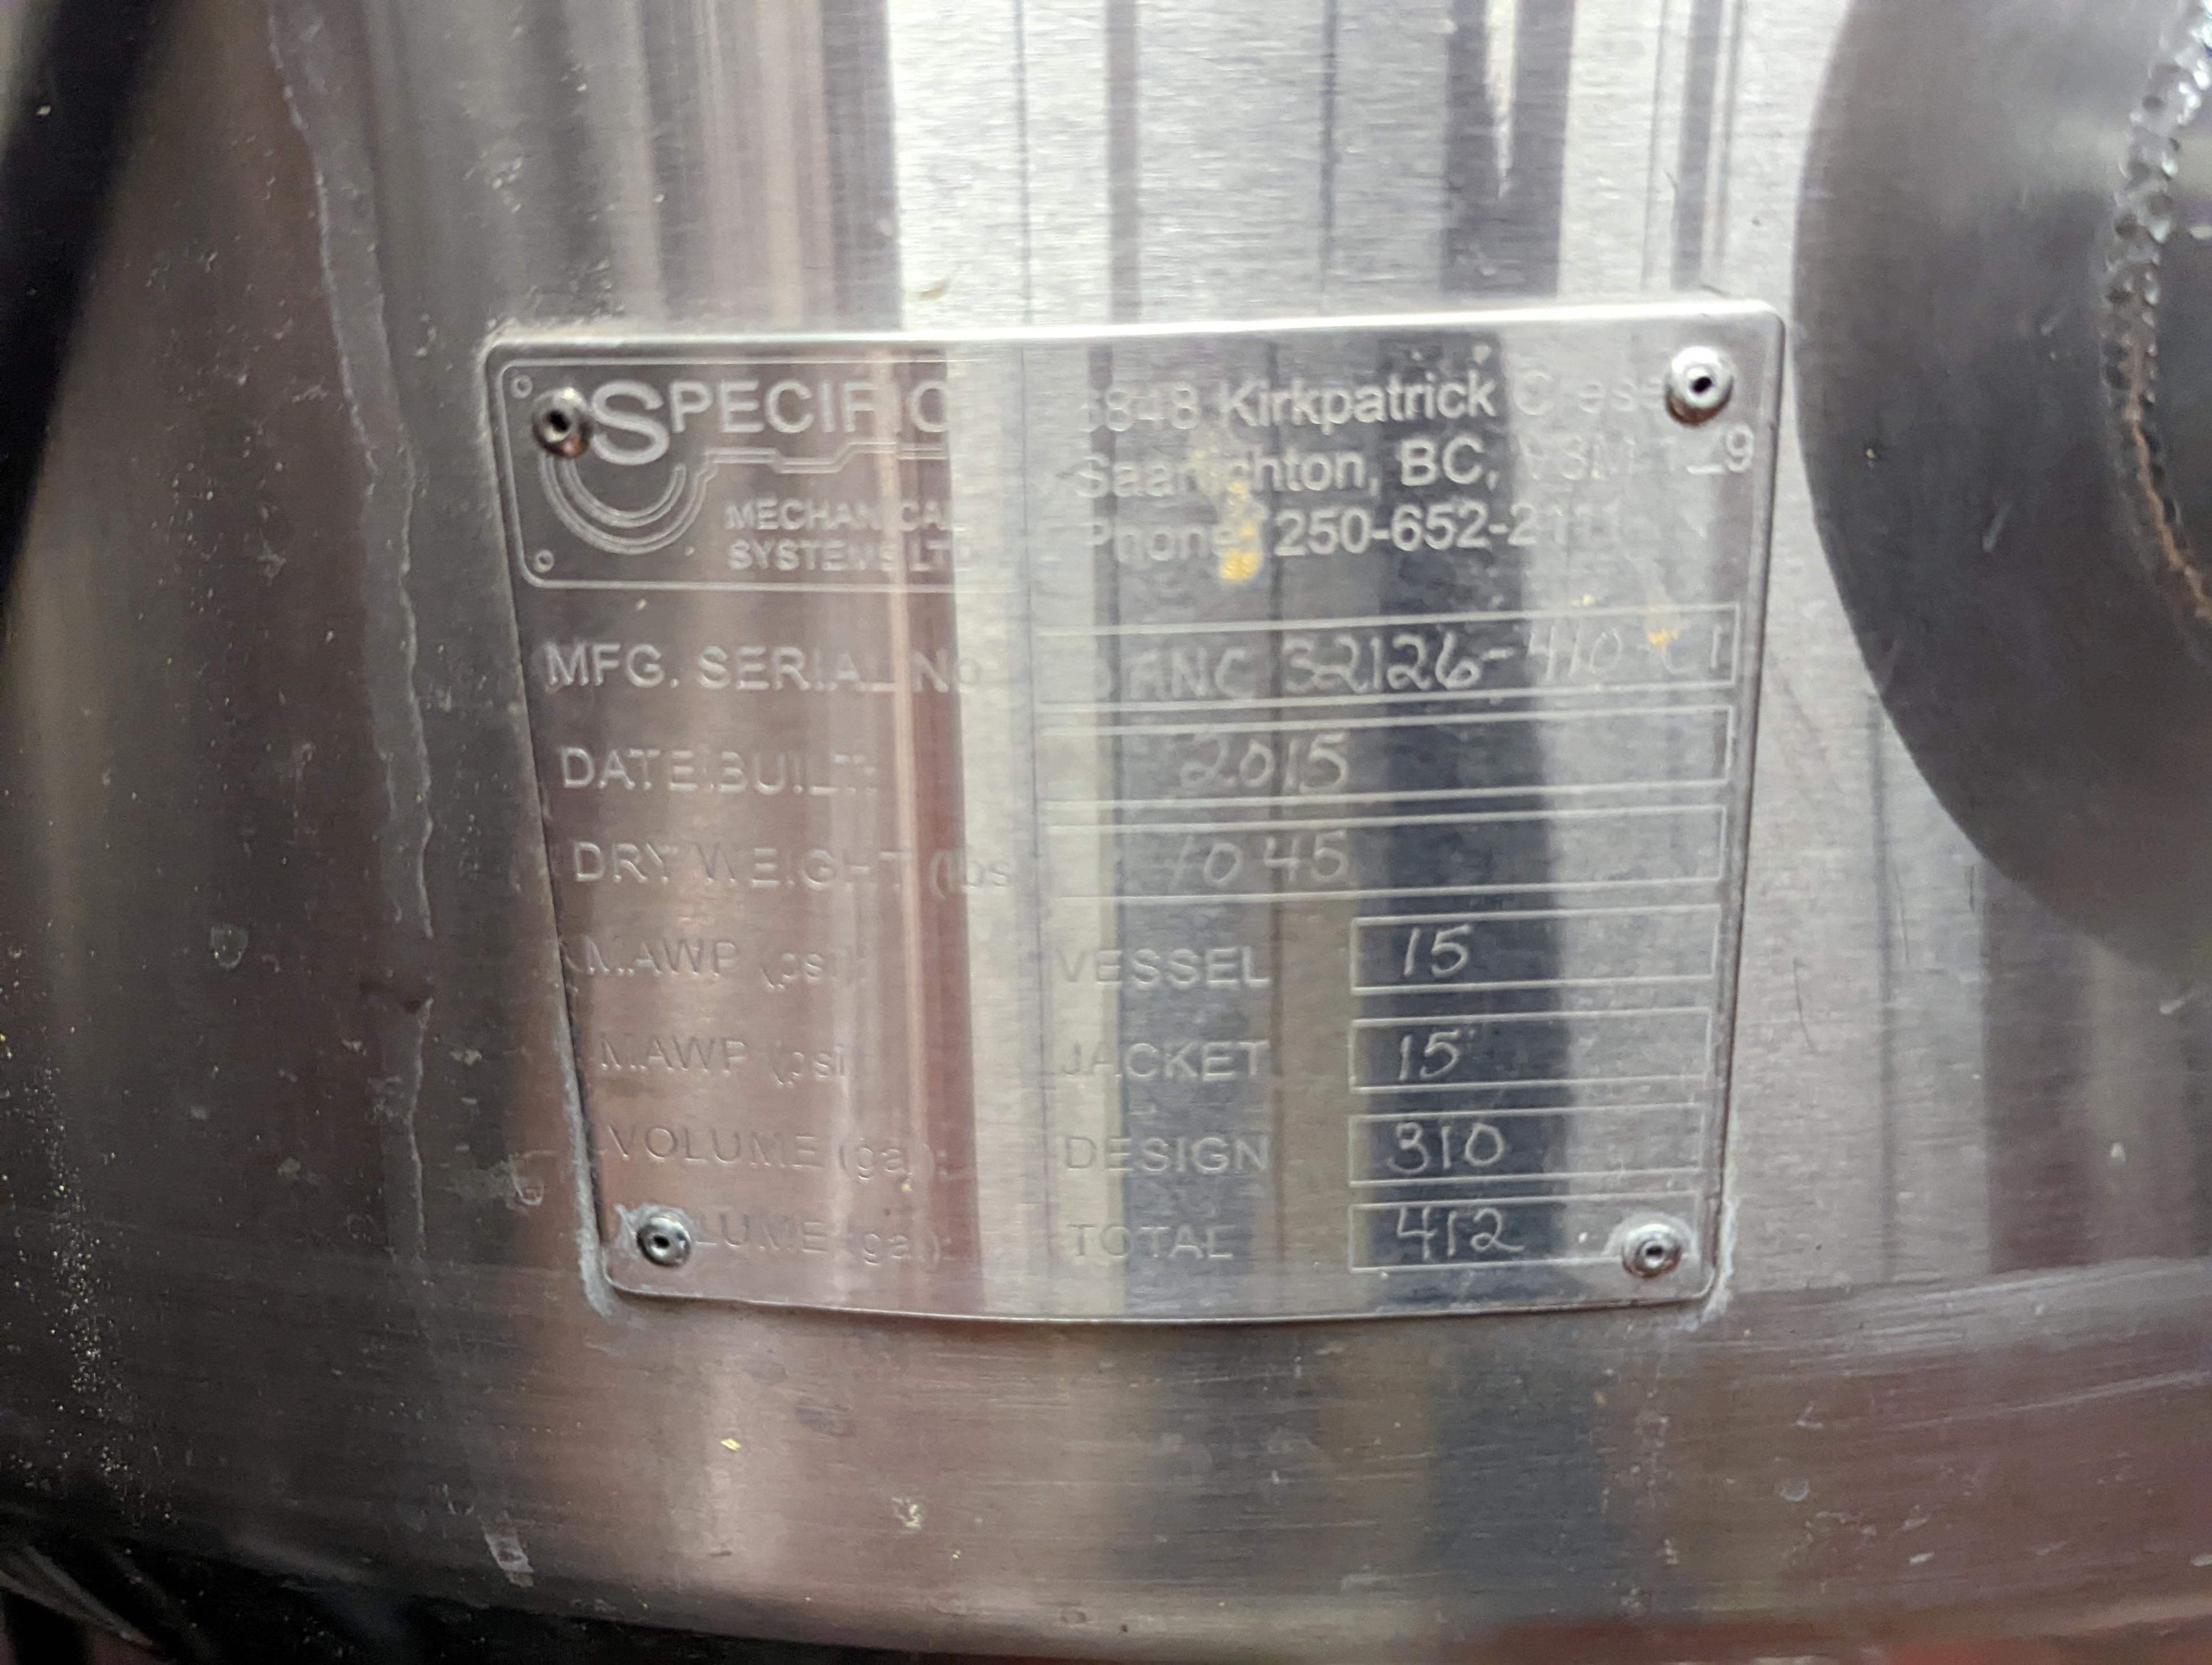 Specific Mechanical Systems 10 Bbl Jacketed Fermenter Tank